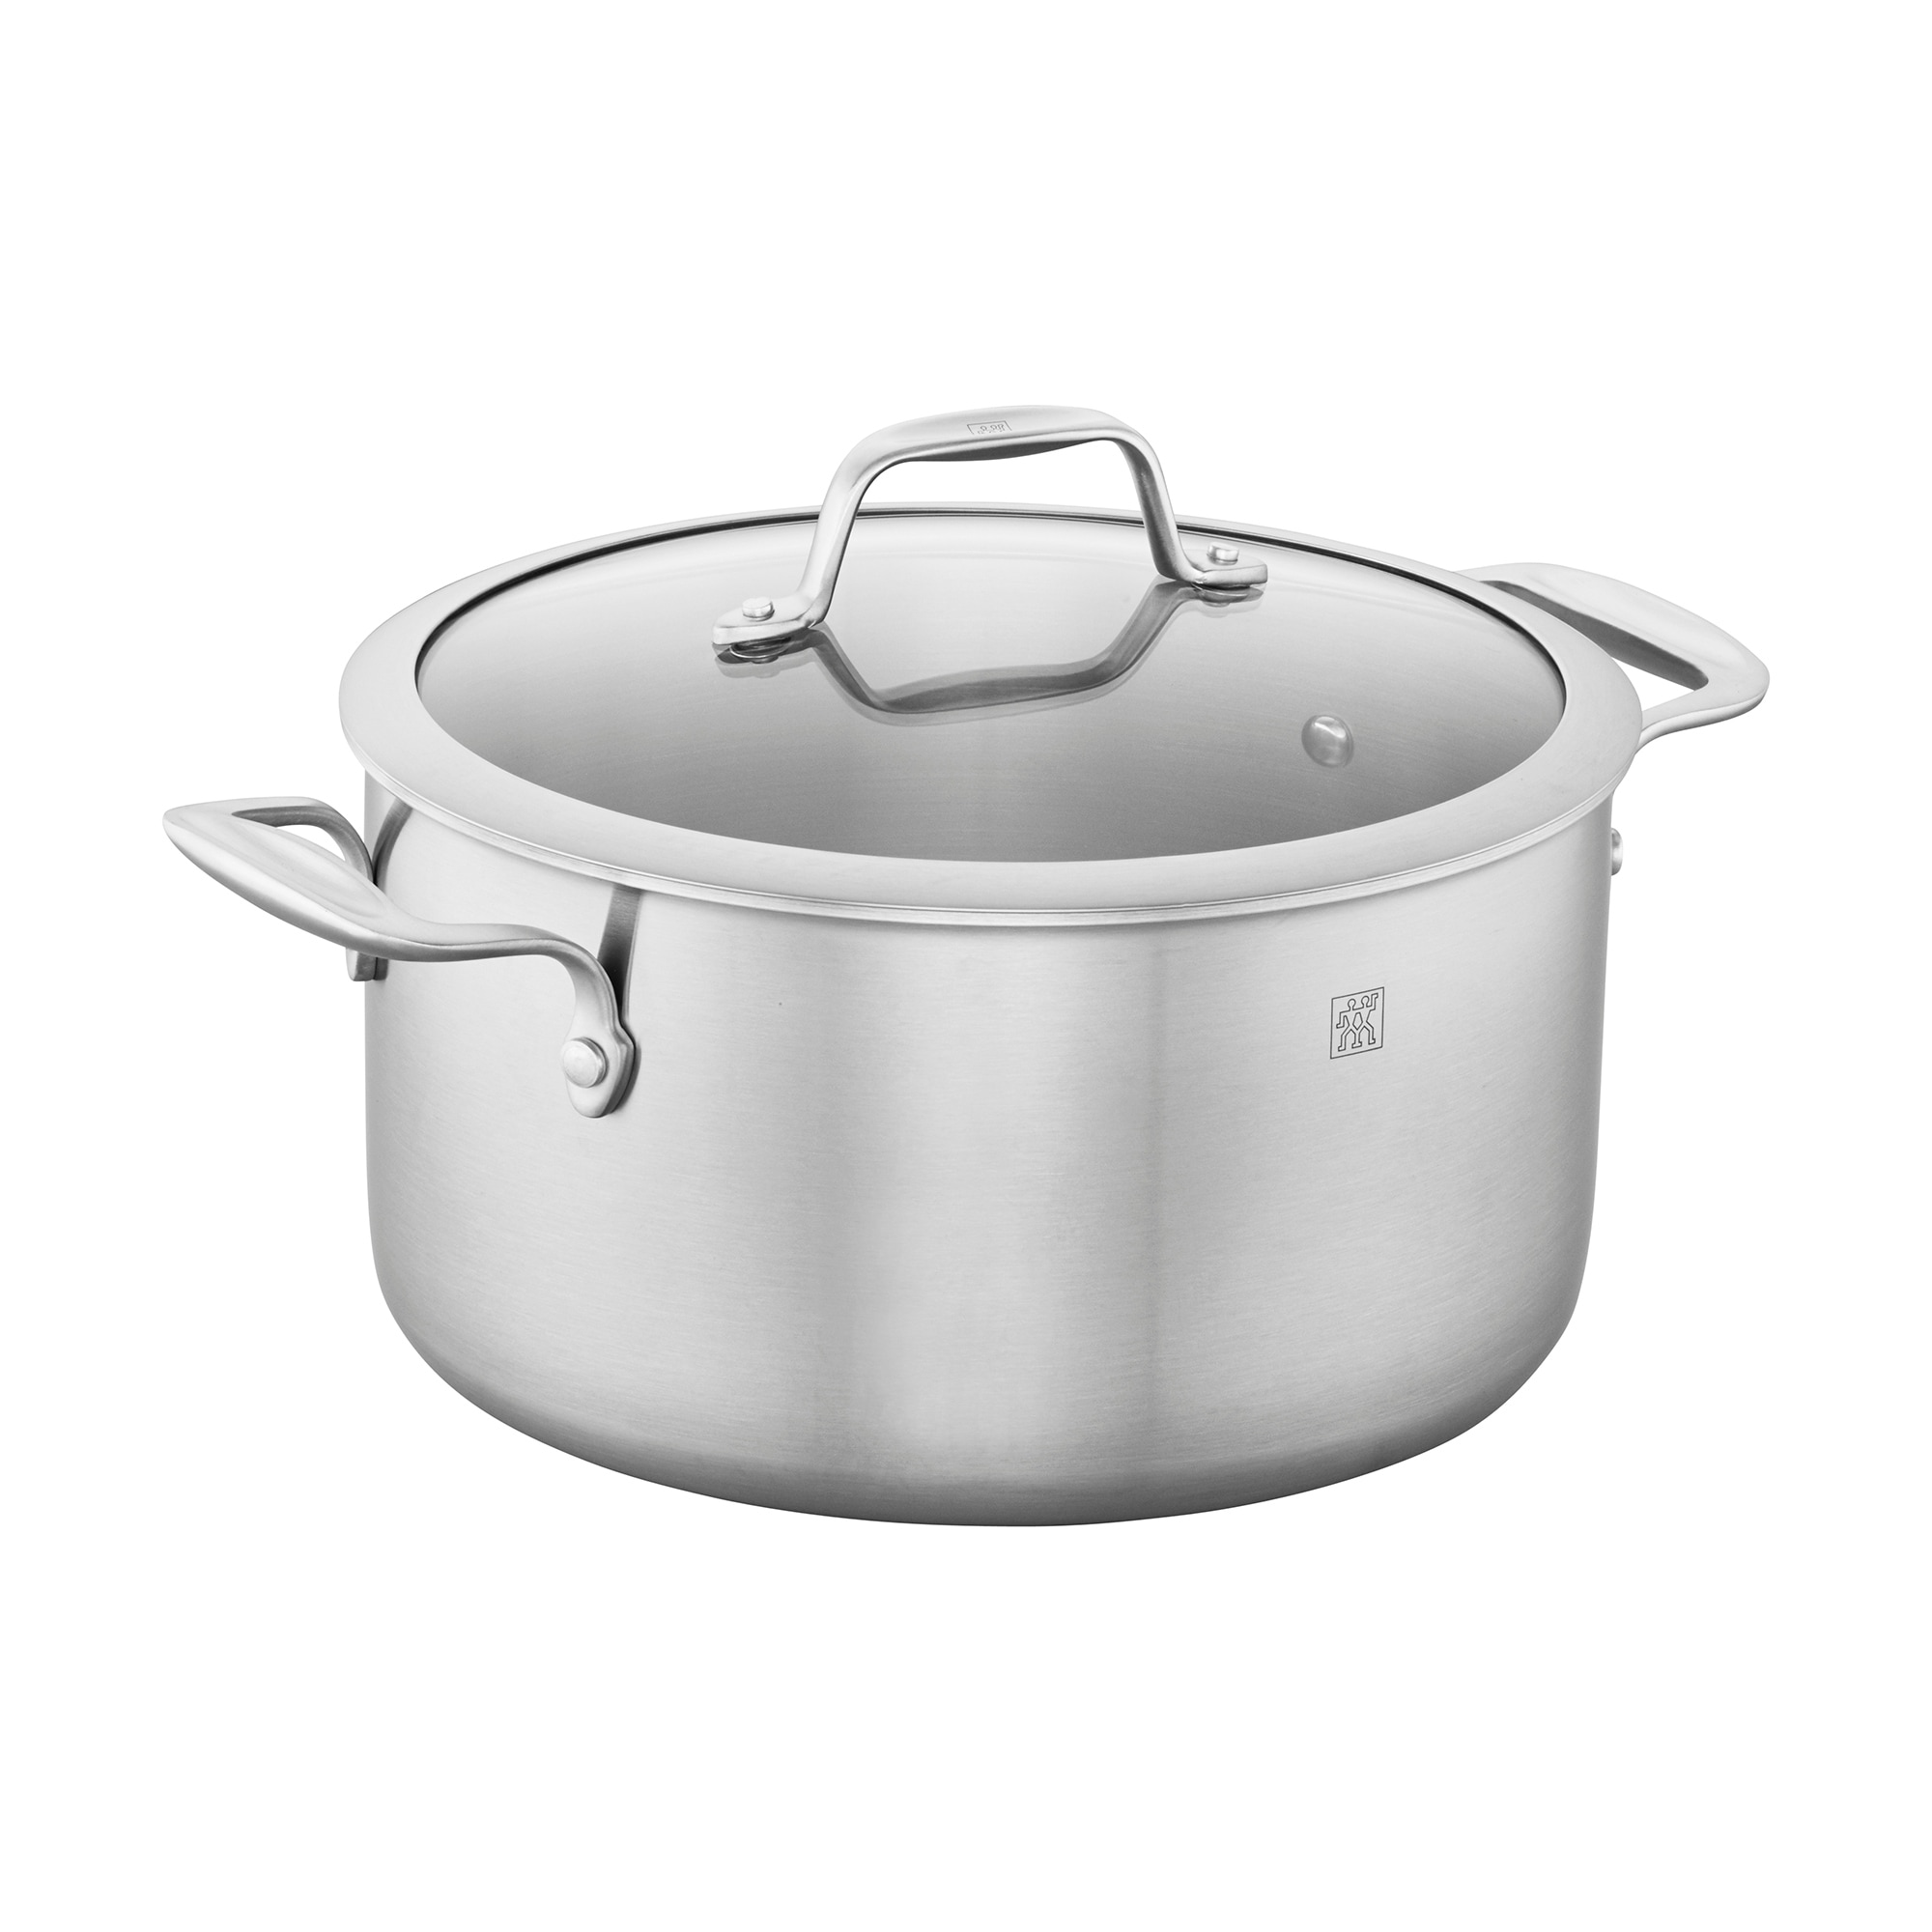 Korkmaz Stainless Steel Dutch Oven with Lid 7 Quart